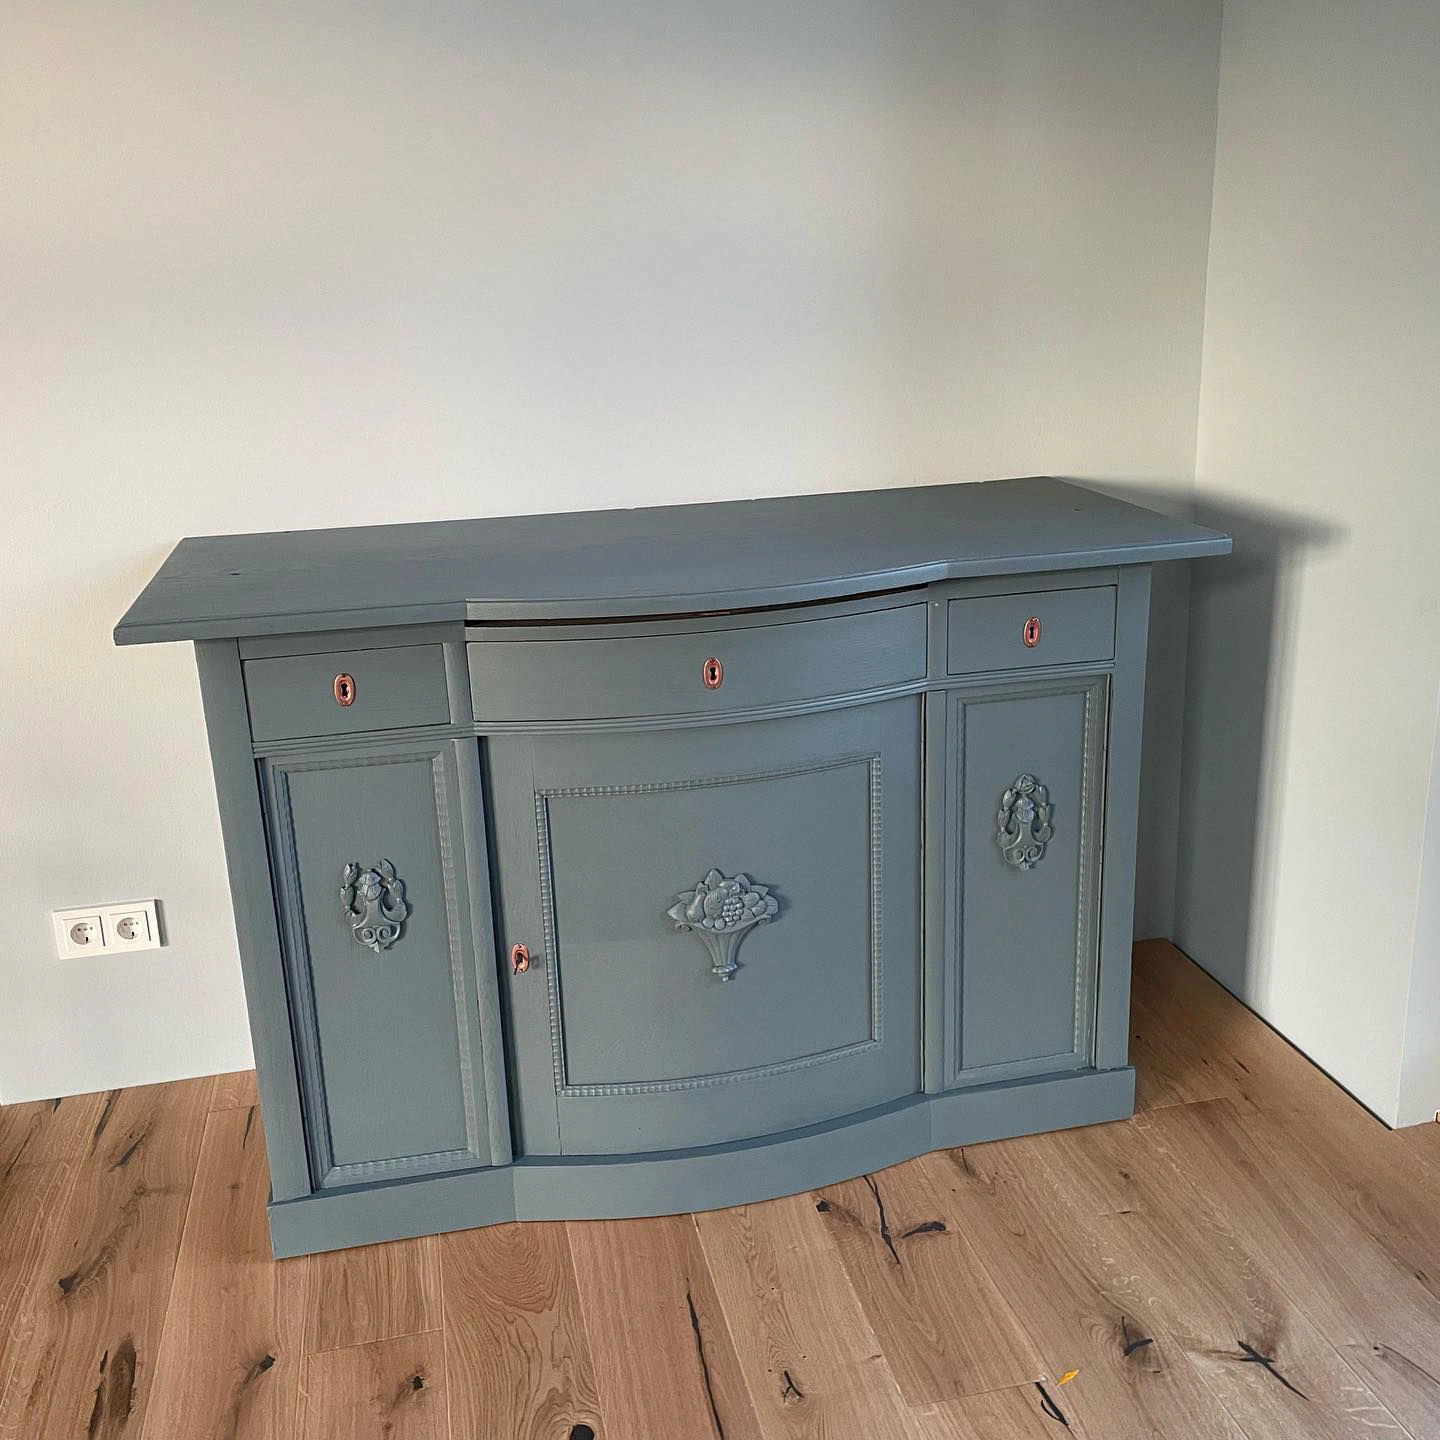 RAL Classic  Blue grey RAL 7031 painter furniture